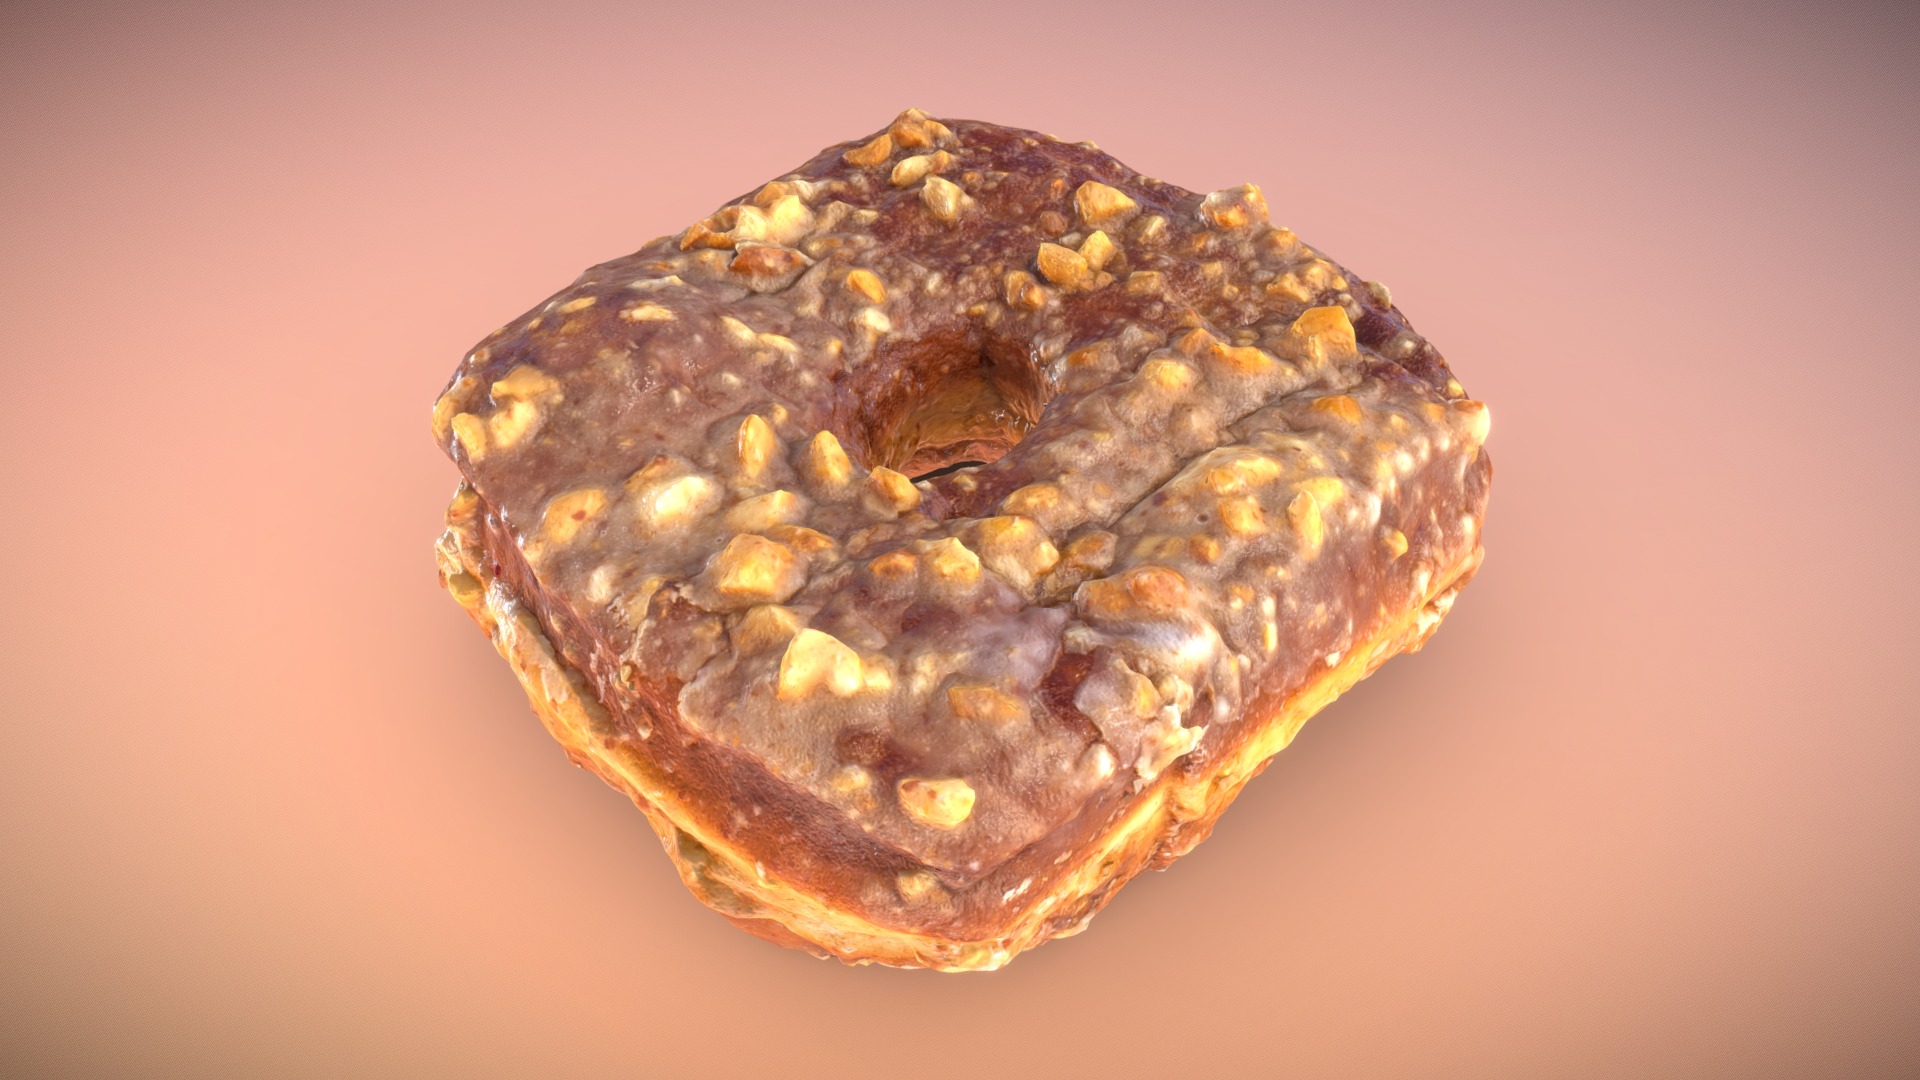 3D model Doughnut Plant Peanut Butter - This is a 3D model of the Doughnut Plant Peanut Butter. The 3D model is about a bagel with sprinkles on it.